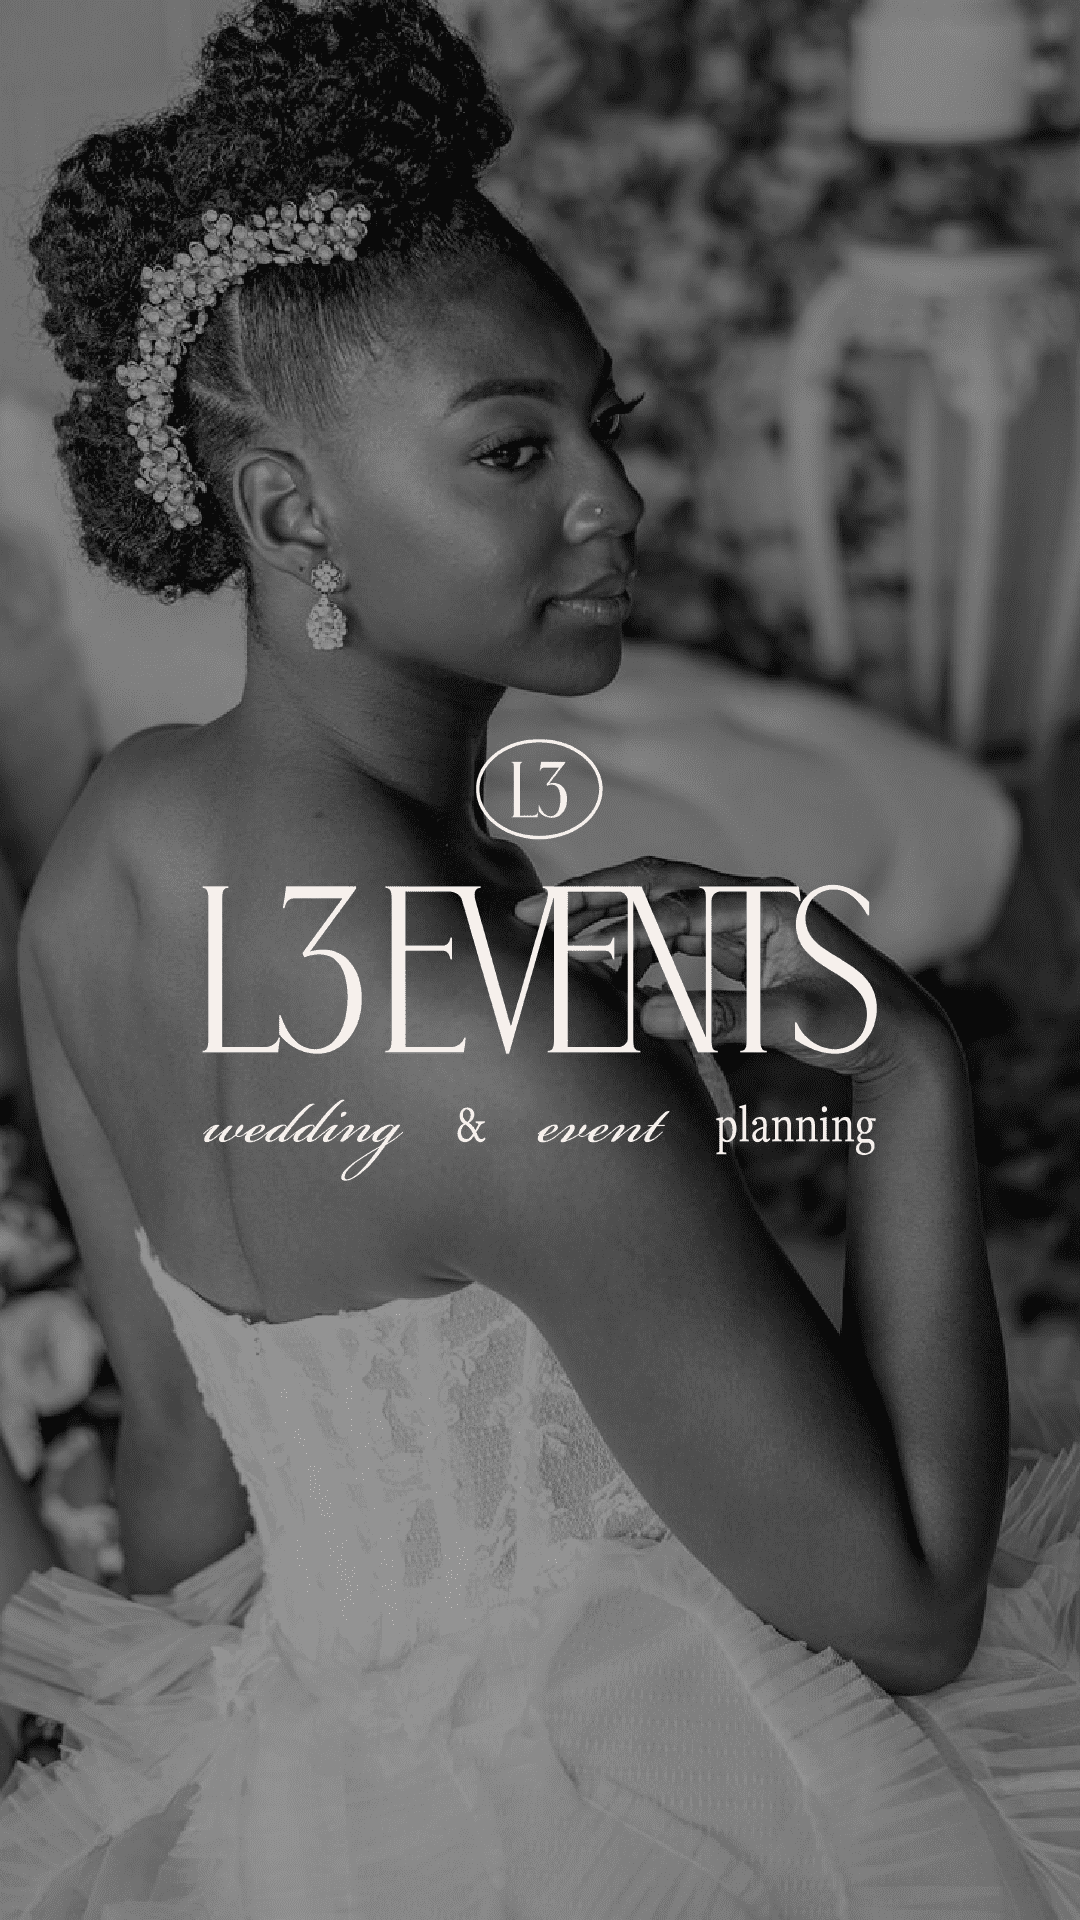 custom brand design for L3 Events logo by Carrylove Designs